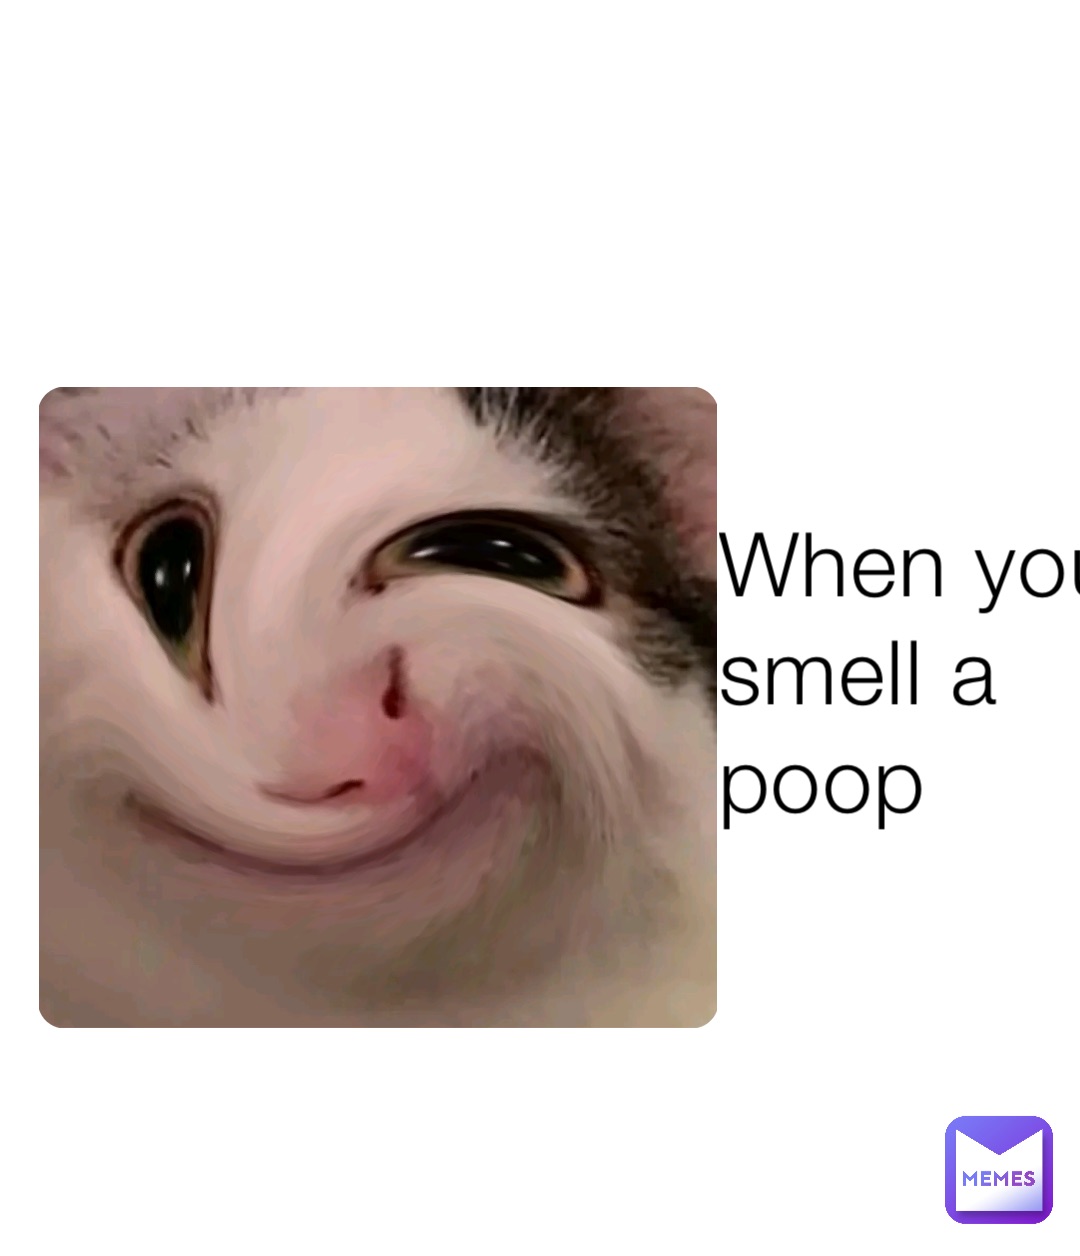 you smell like poop